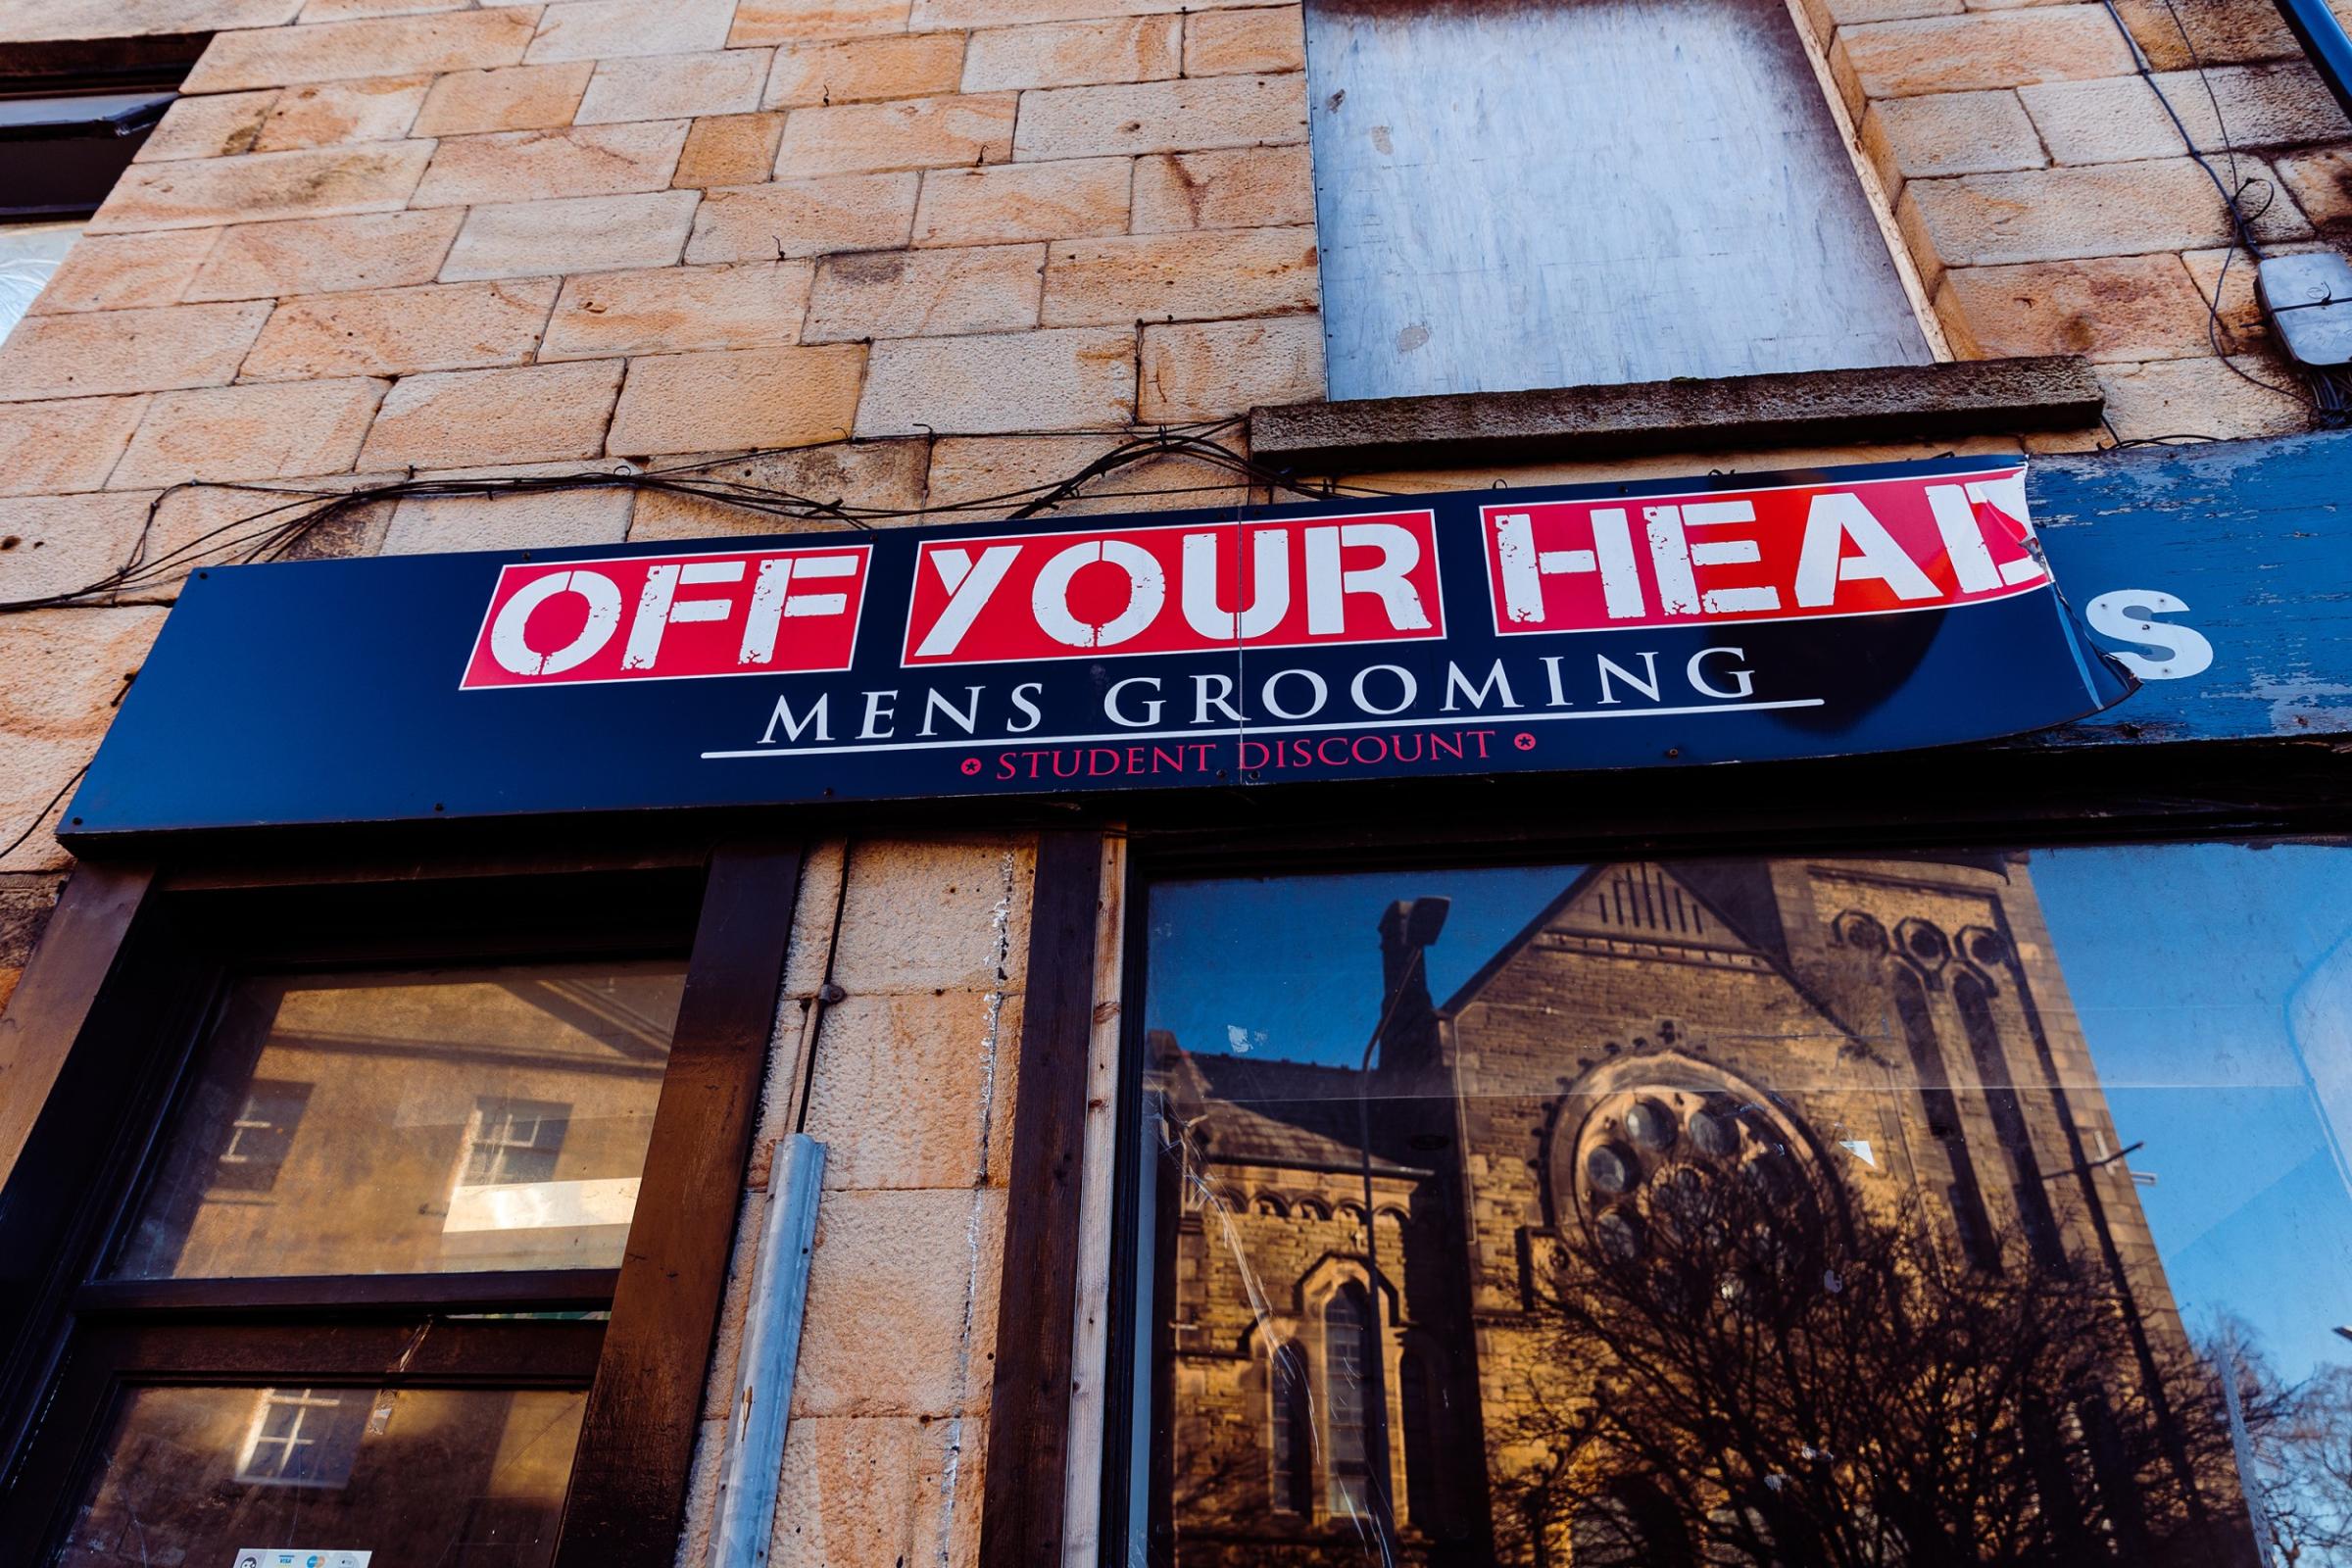 Image of a shop front called Off Your HEad Mens Grooming with the reflection of an old church in the window